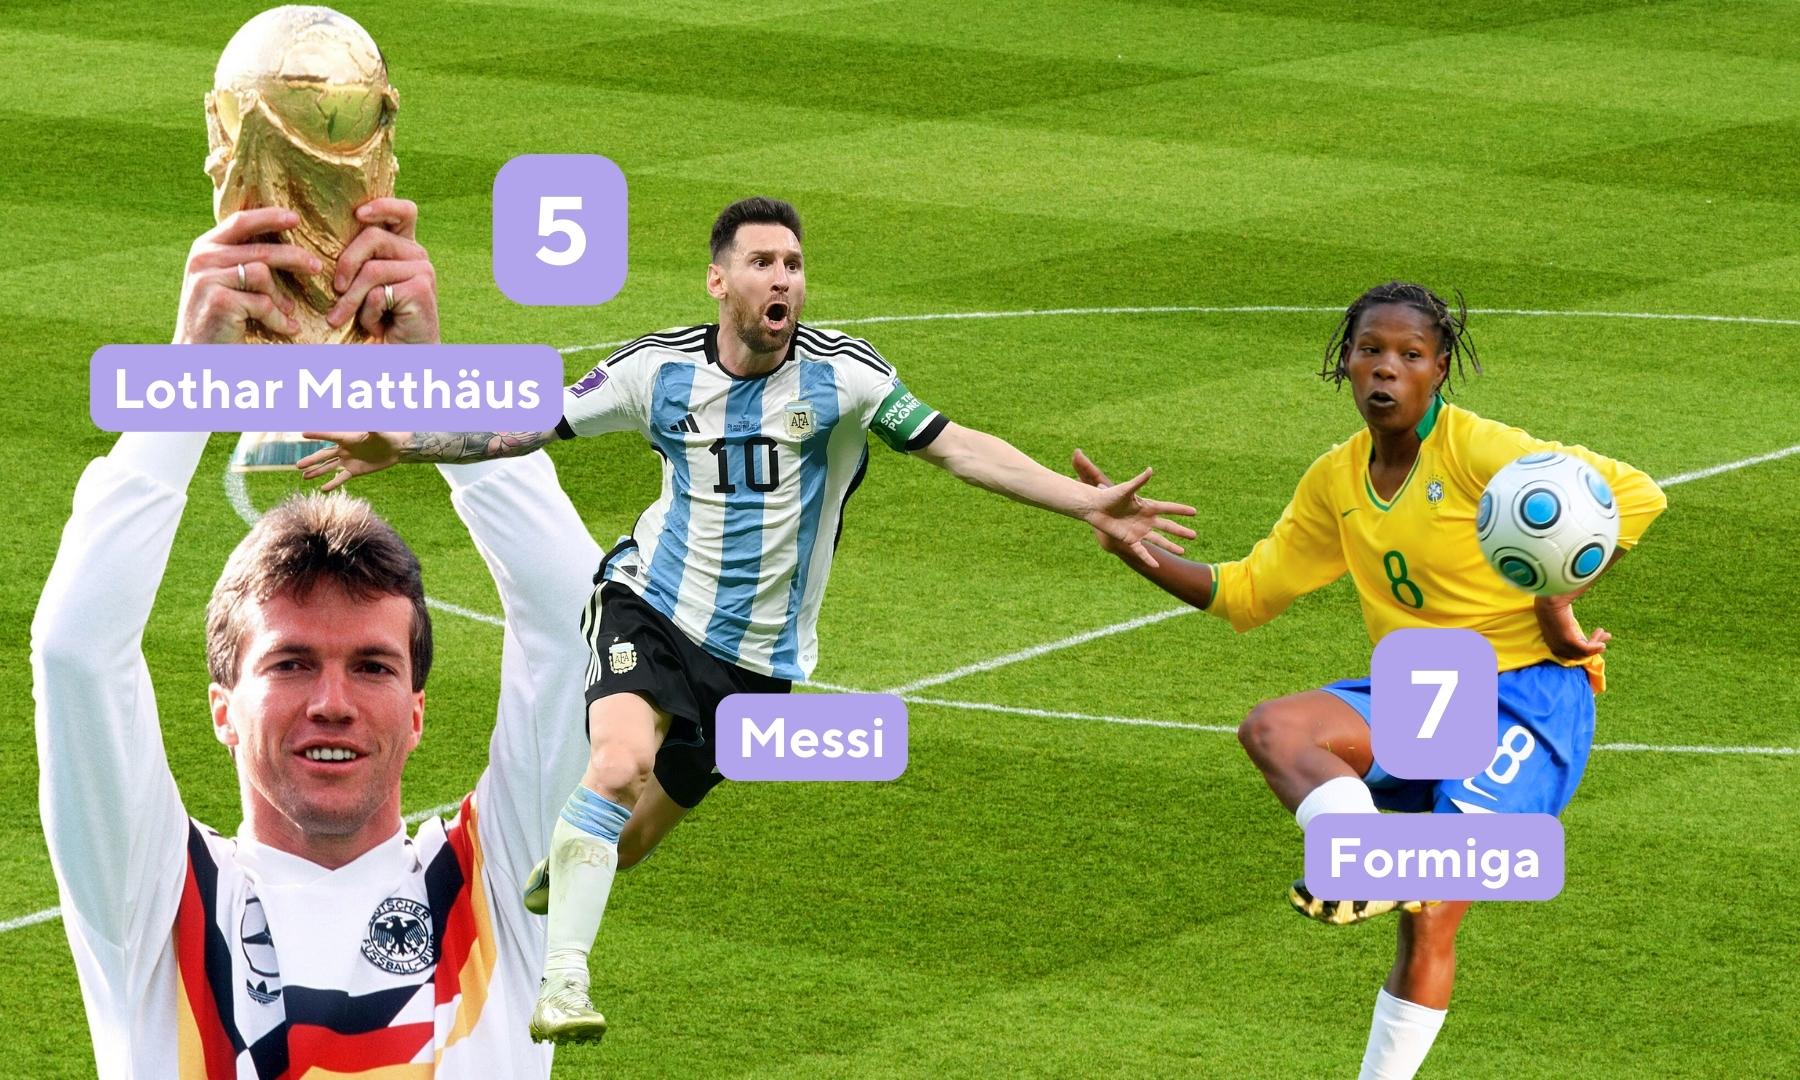 Soccer statistics for most World Cup appearances include Messi, Lothar Matthaus, and Formiga.